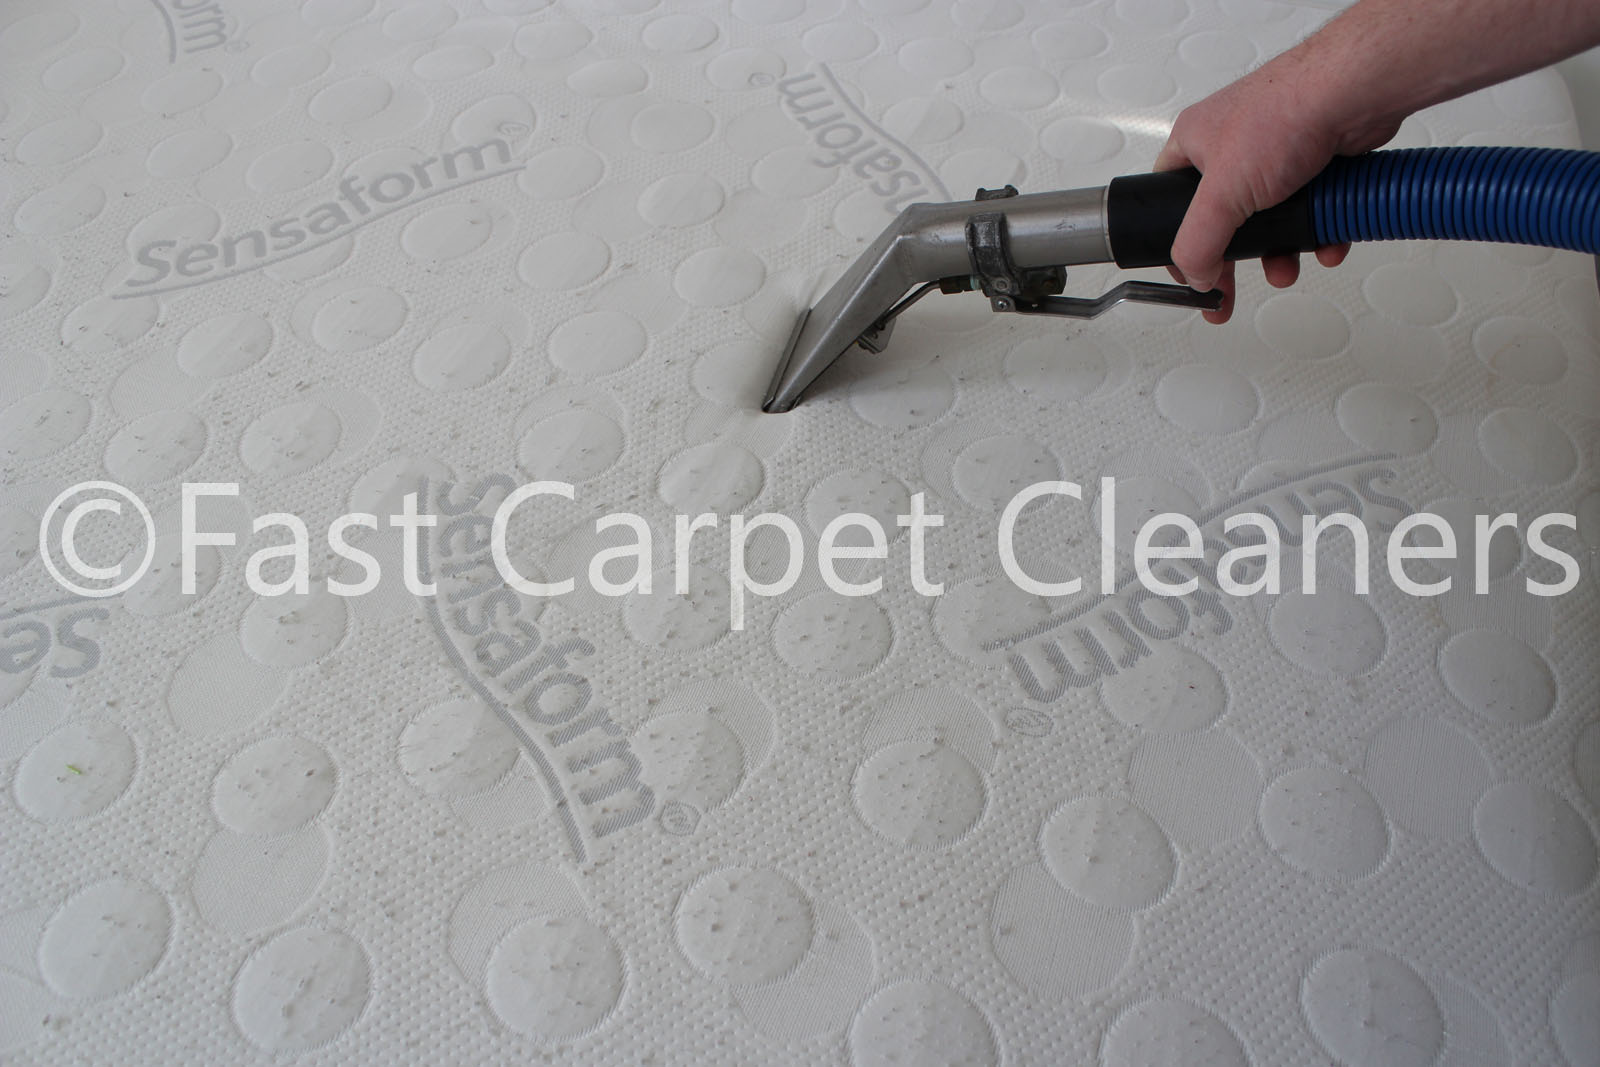 Fast Carpet Cleaners logo